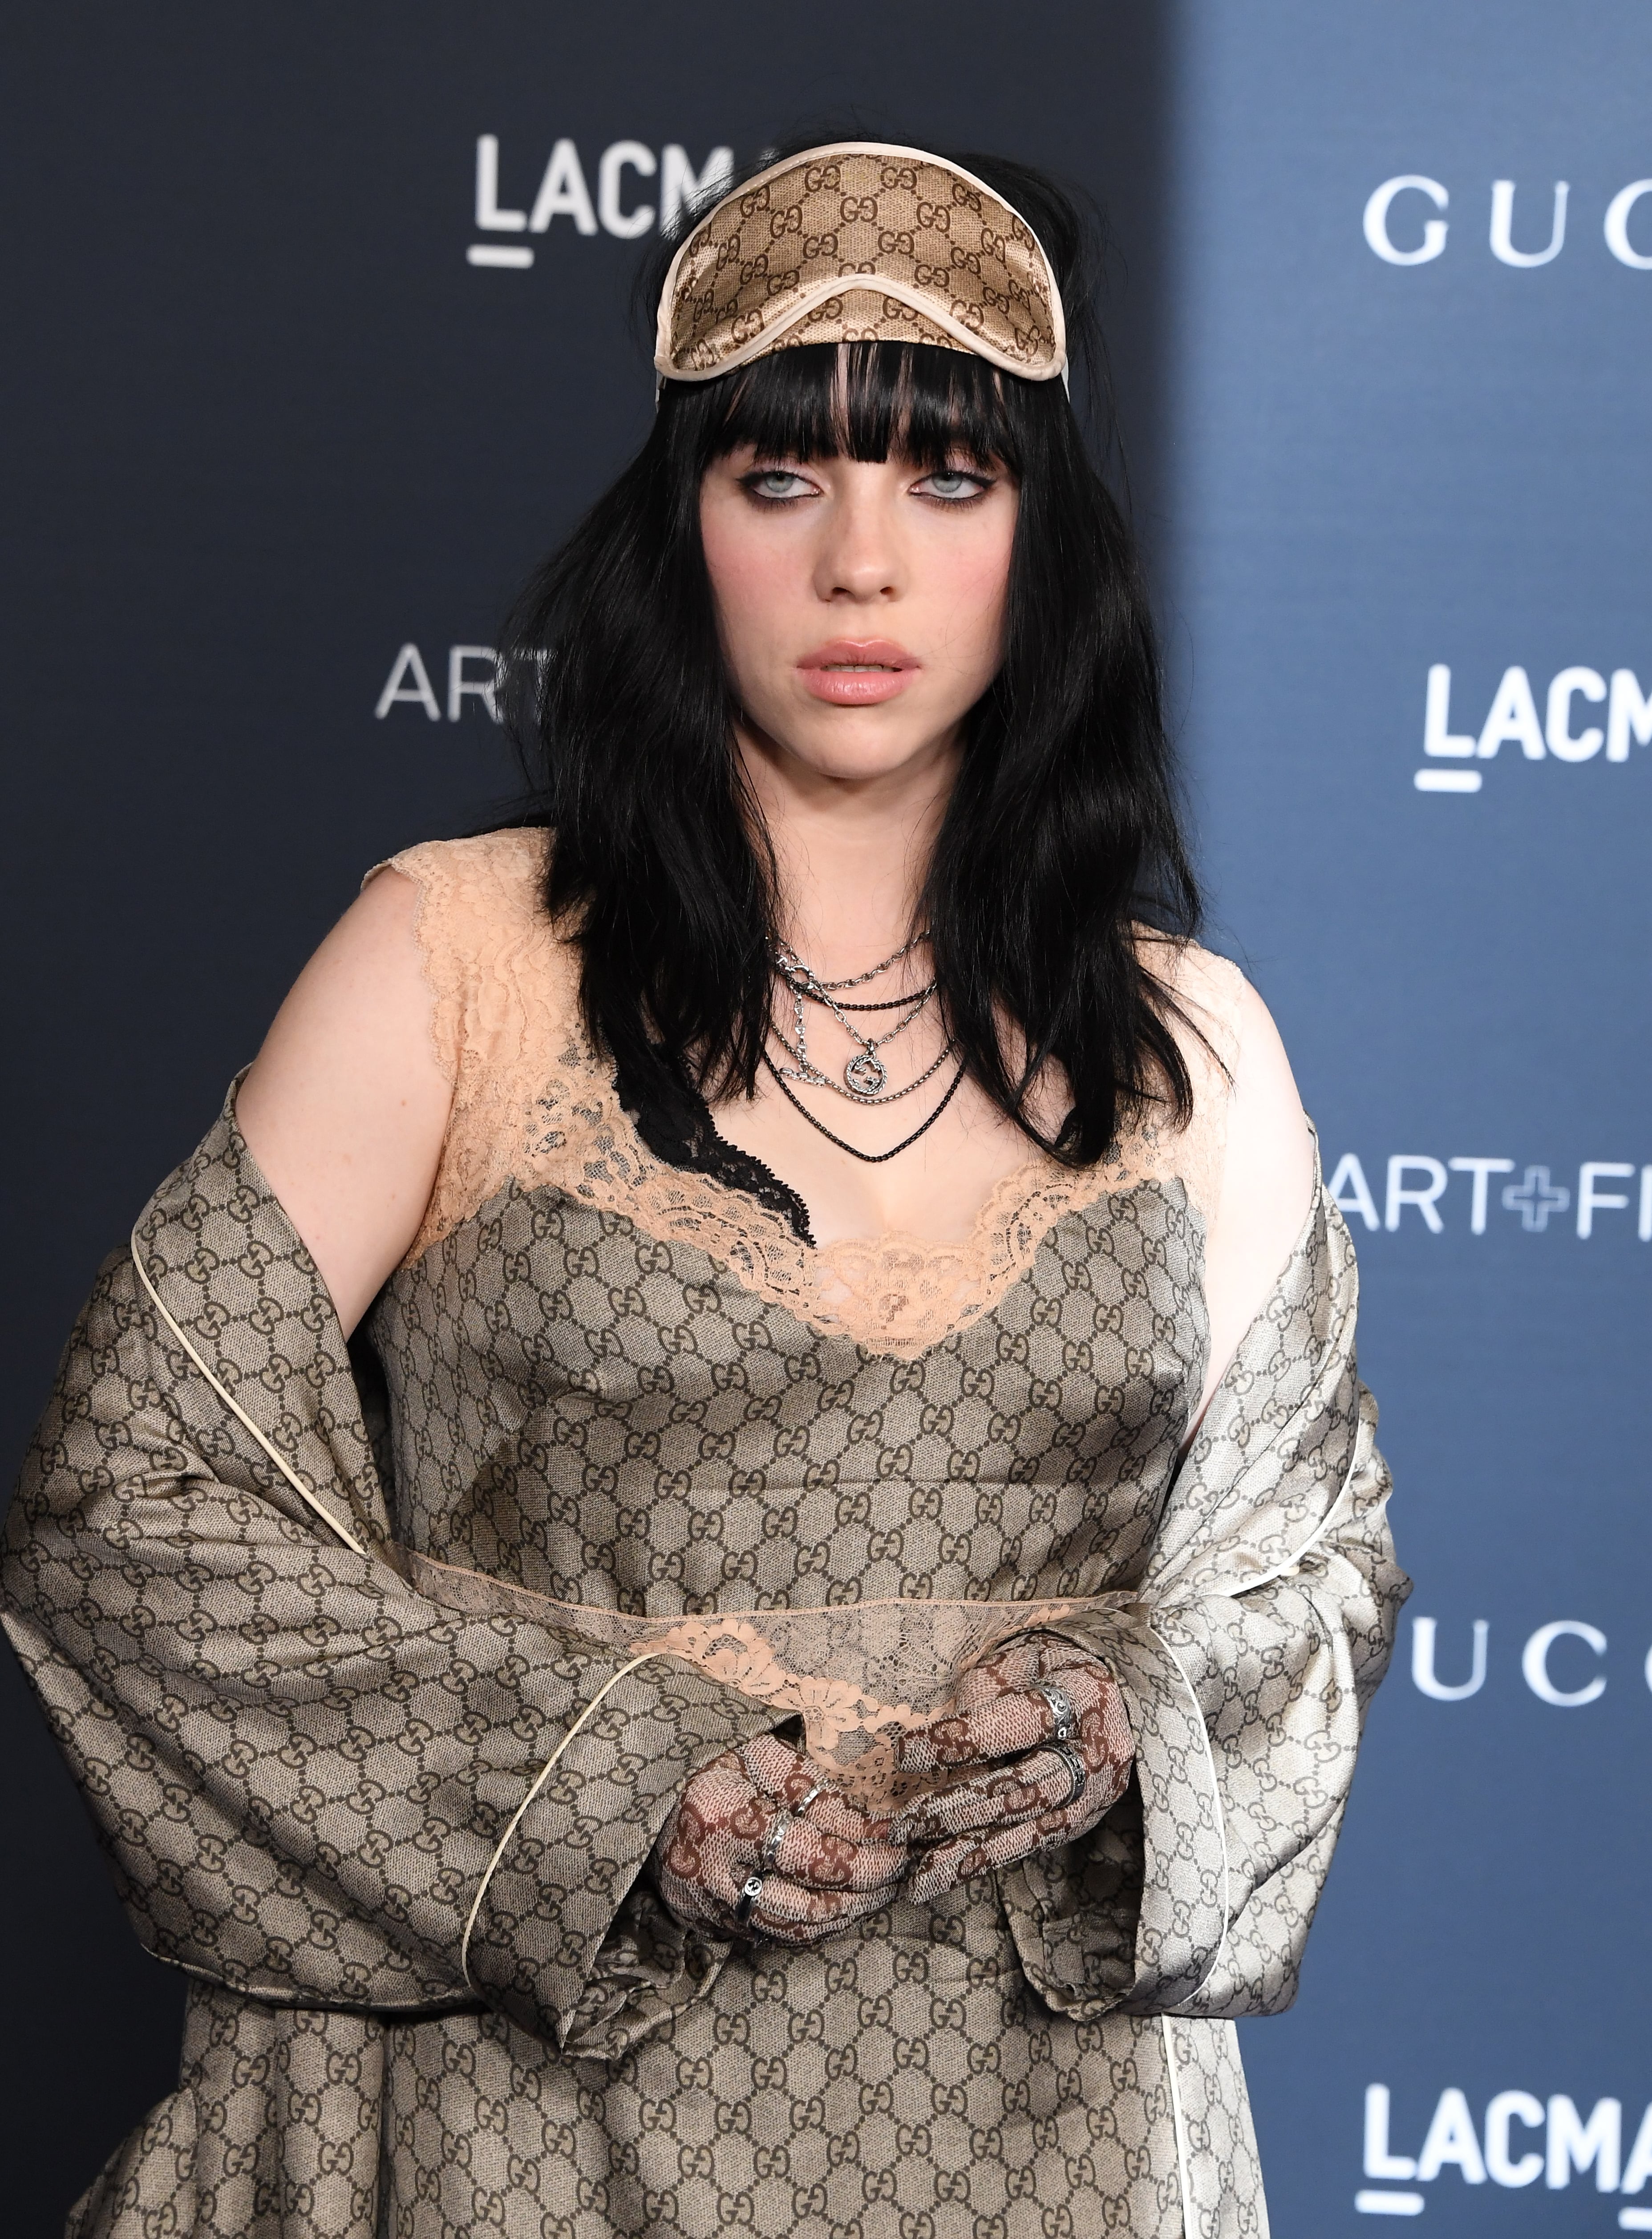 Billie Eilish Shares Why She Deleted Social Media From Phone